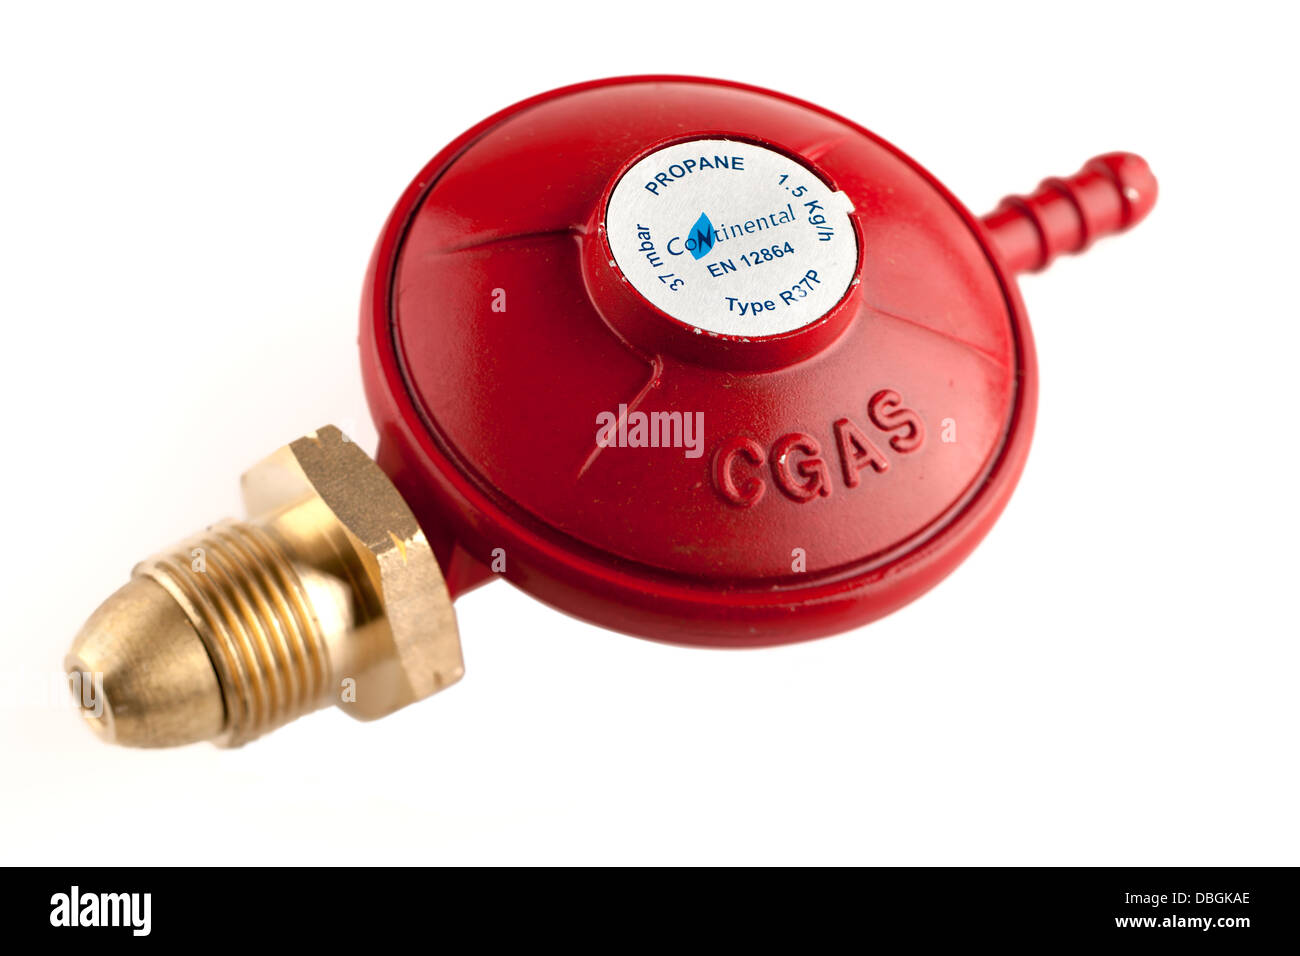 Red propane gas governor 37 millibar type R37P Stock Photo